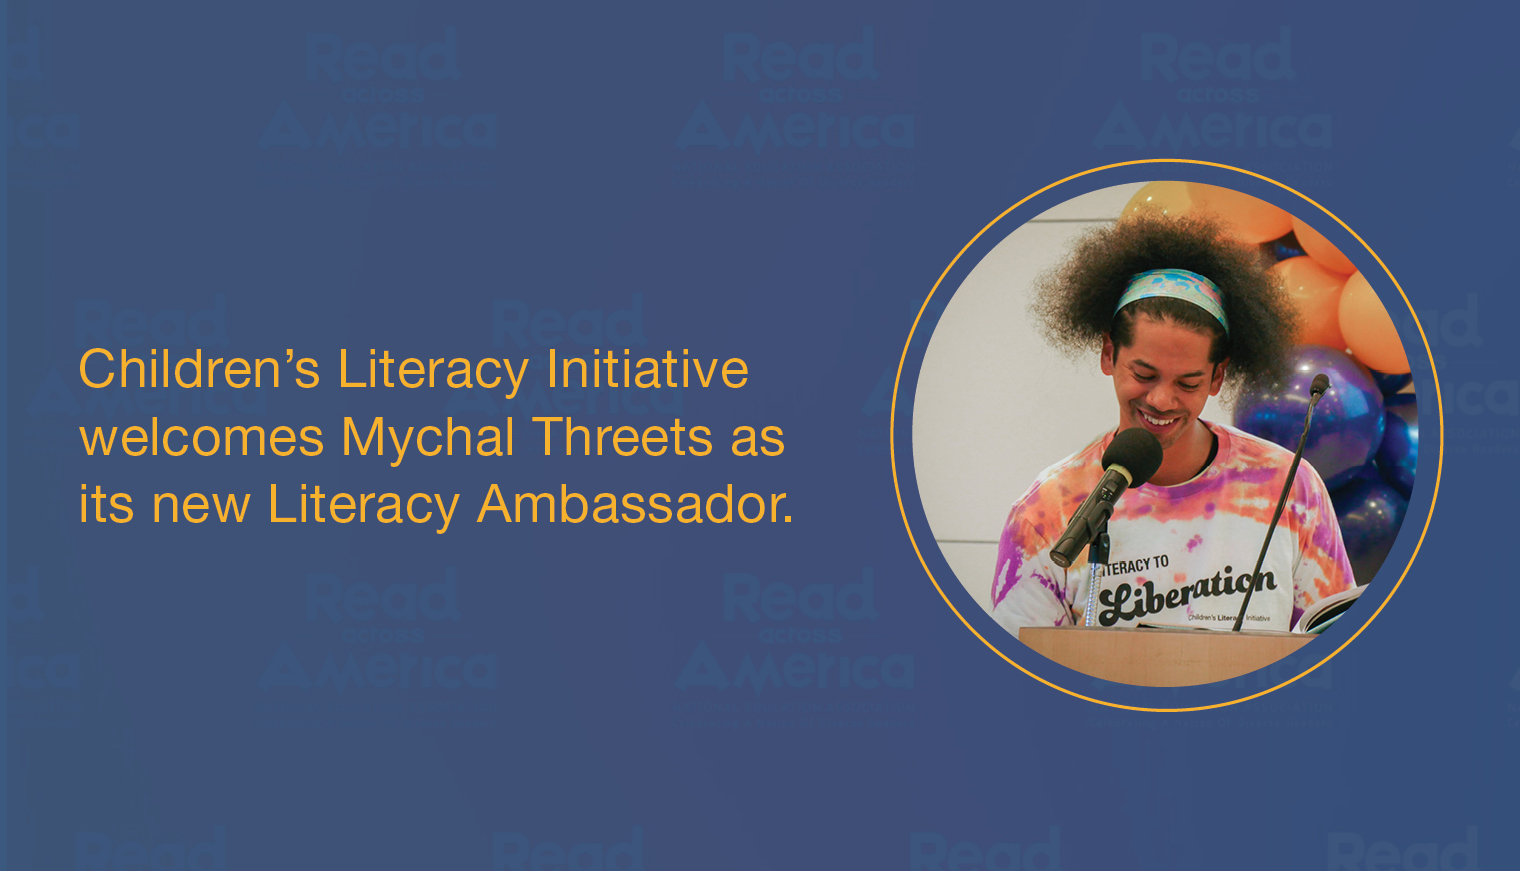 Featured image for “CLI Welcomes Mychal Threets as Literacy Ambassador”